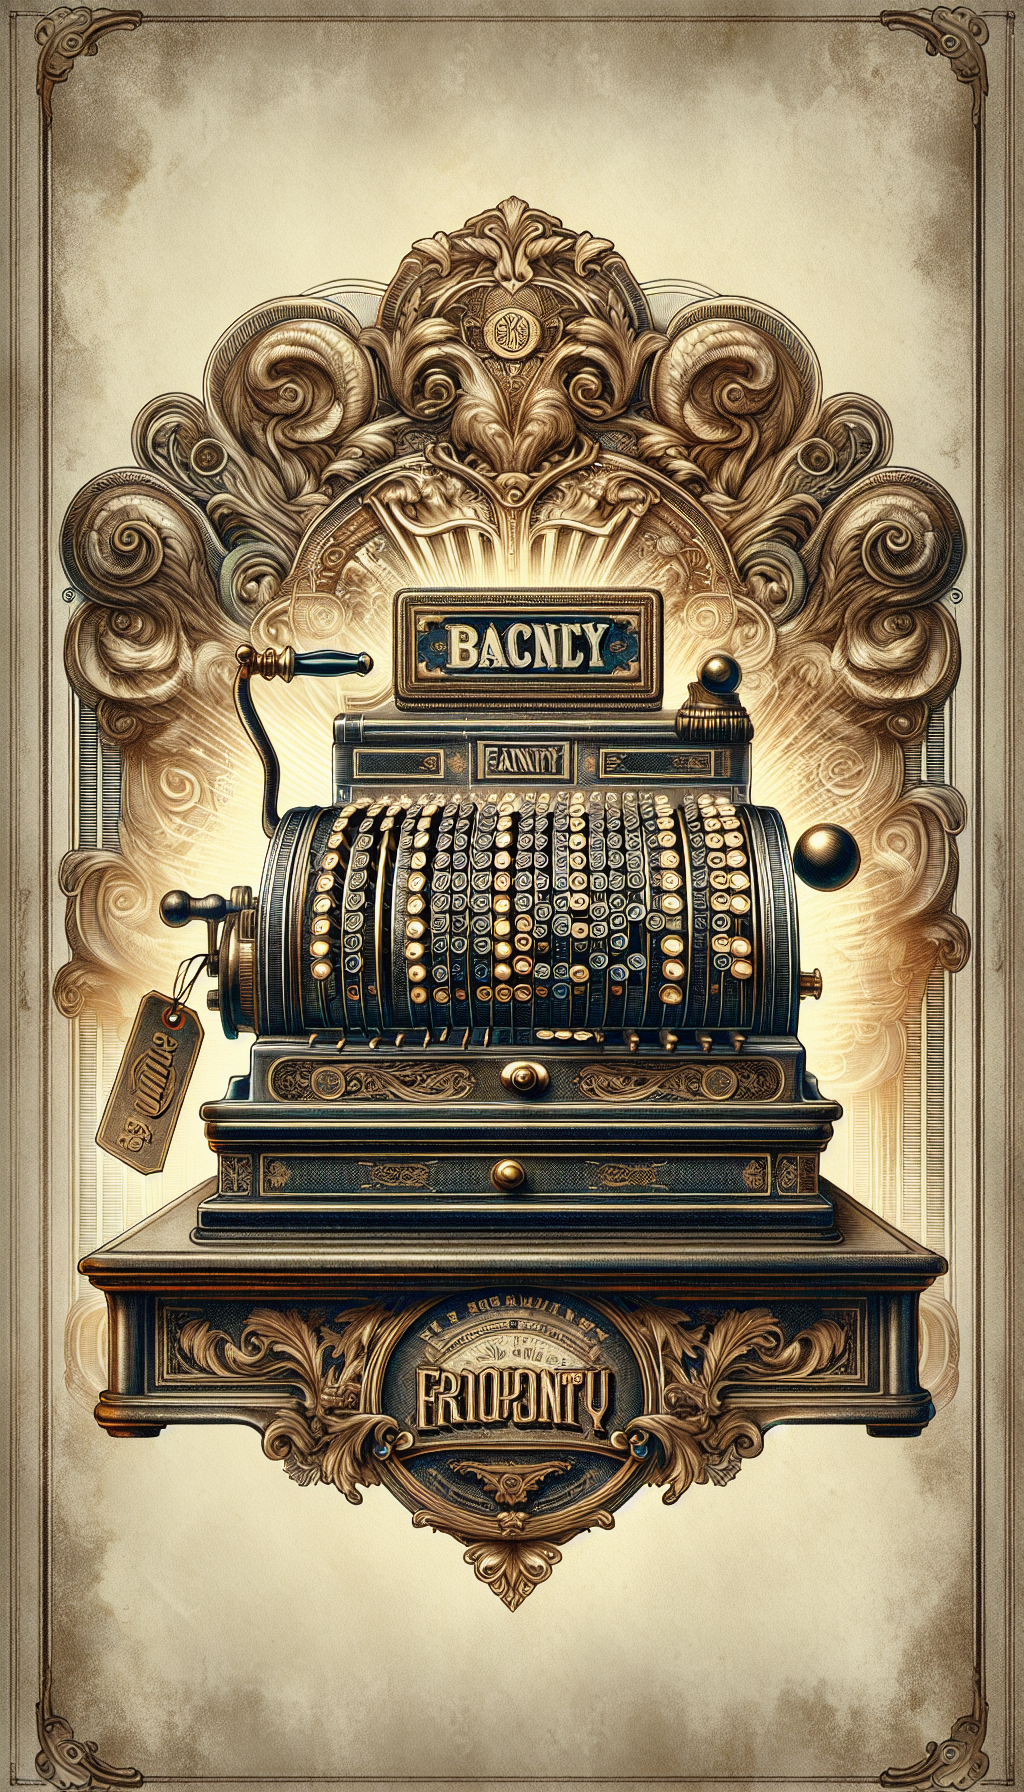 A sleek, vintage-style illustration showing a regal, ornate antique cash register, with brand emblems etched in gold, sitting atop a pedestal. Surrounding it, ghostly echoes of prestigious manufacturer logos envelop the machine in a soft glow, while a price tag swings from the register's handle, subtly implying its high value due to the brand mystique.